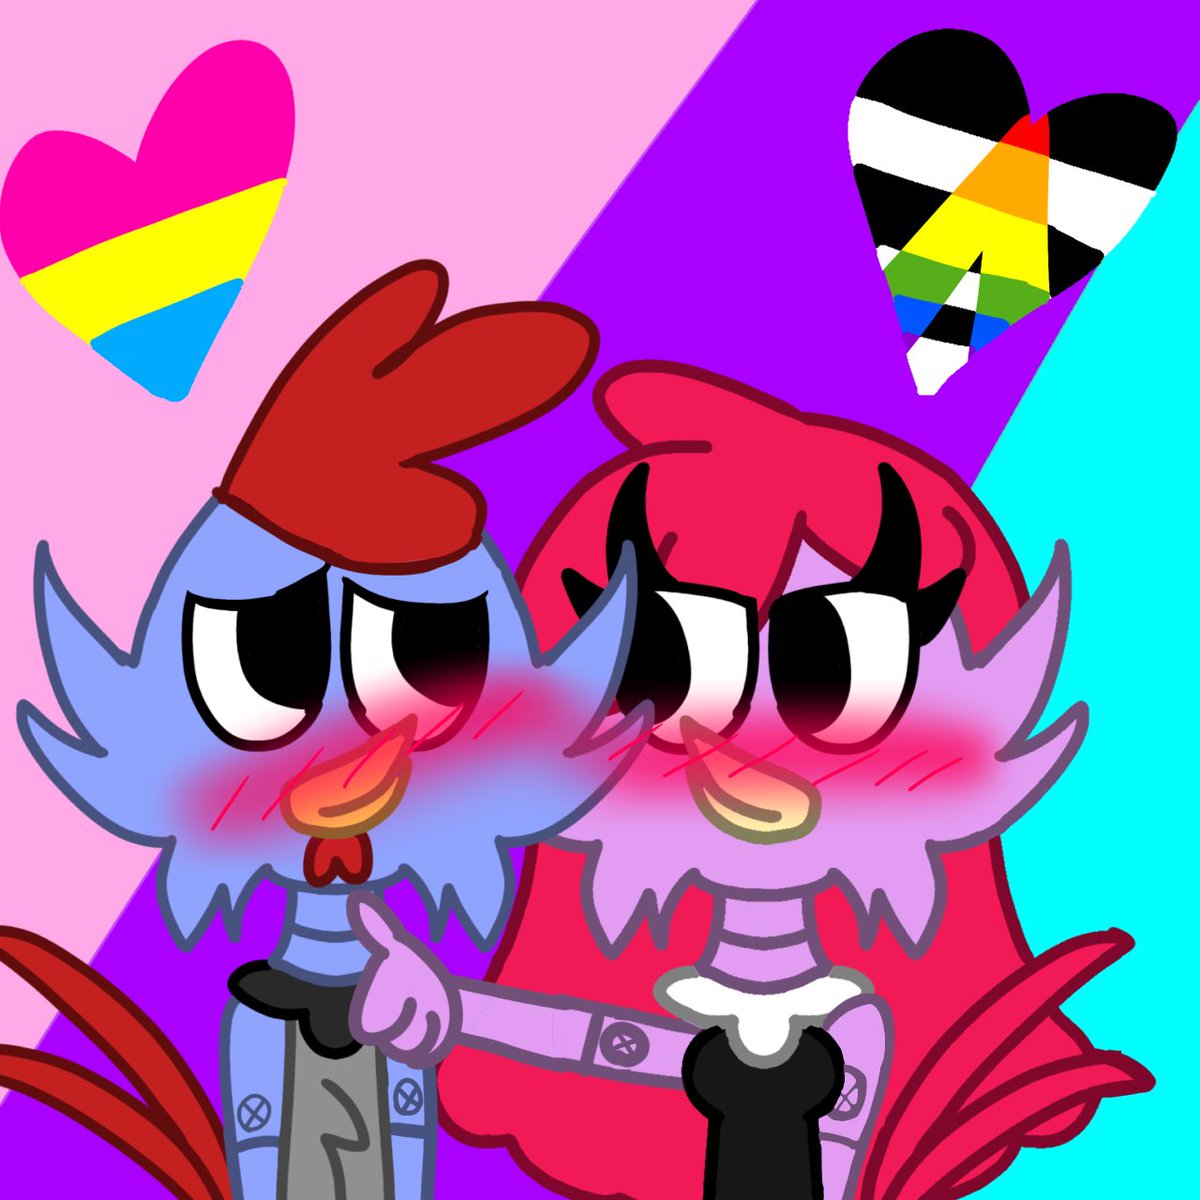 Robot Chicken couple 

#Sonic #SonicTheHedeghog #CanonXOC #Scratch #PrideMonth #Pansexual #StraightAlly